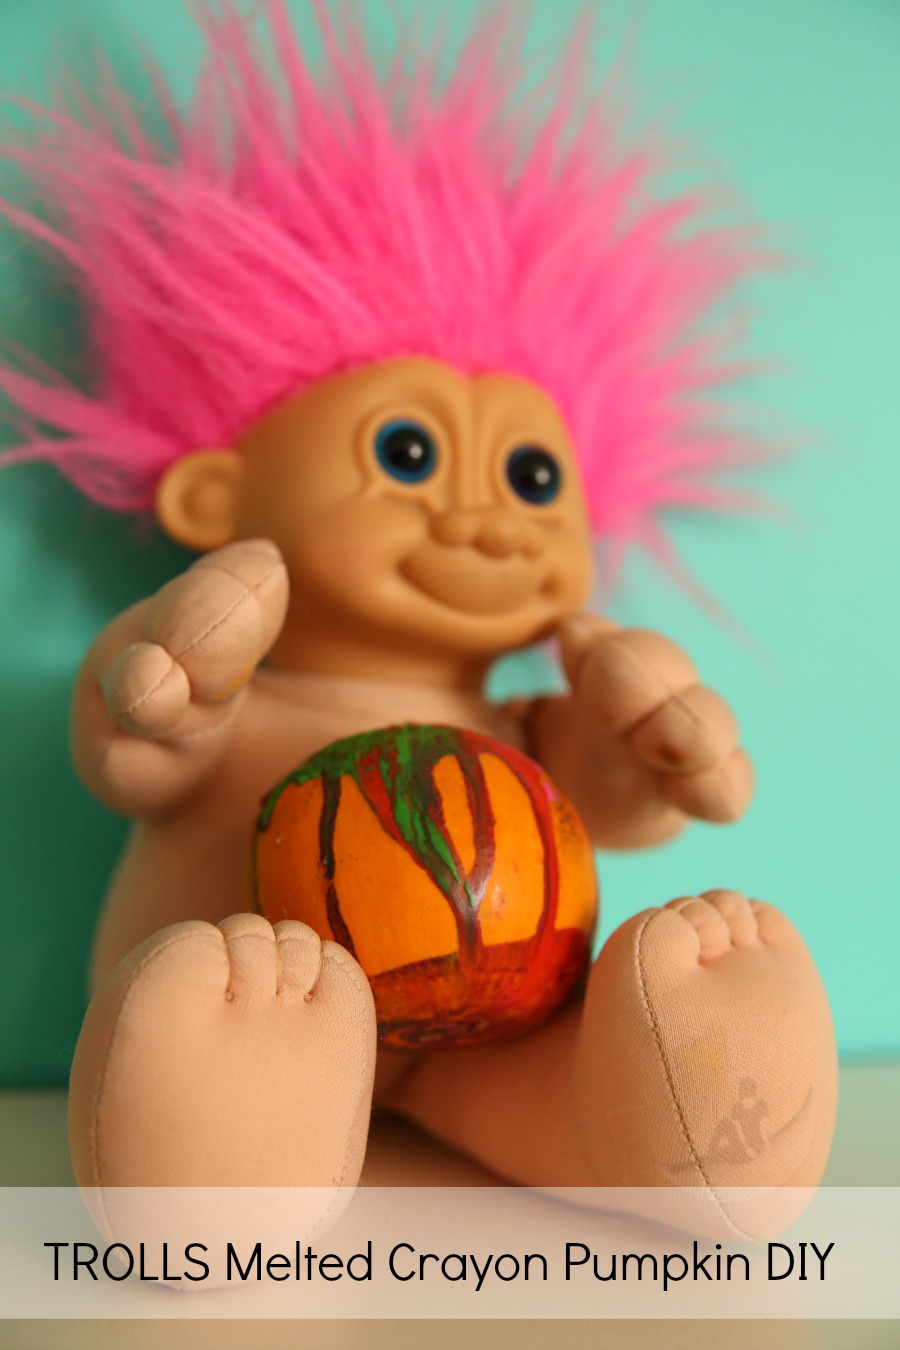 Our "vintage" Troll with TROLLS melted crayon pumpkin DIY